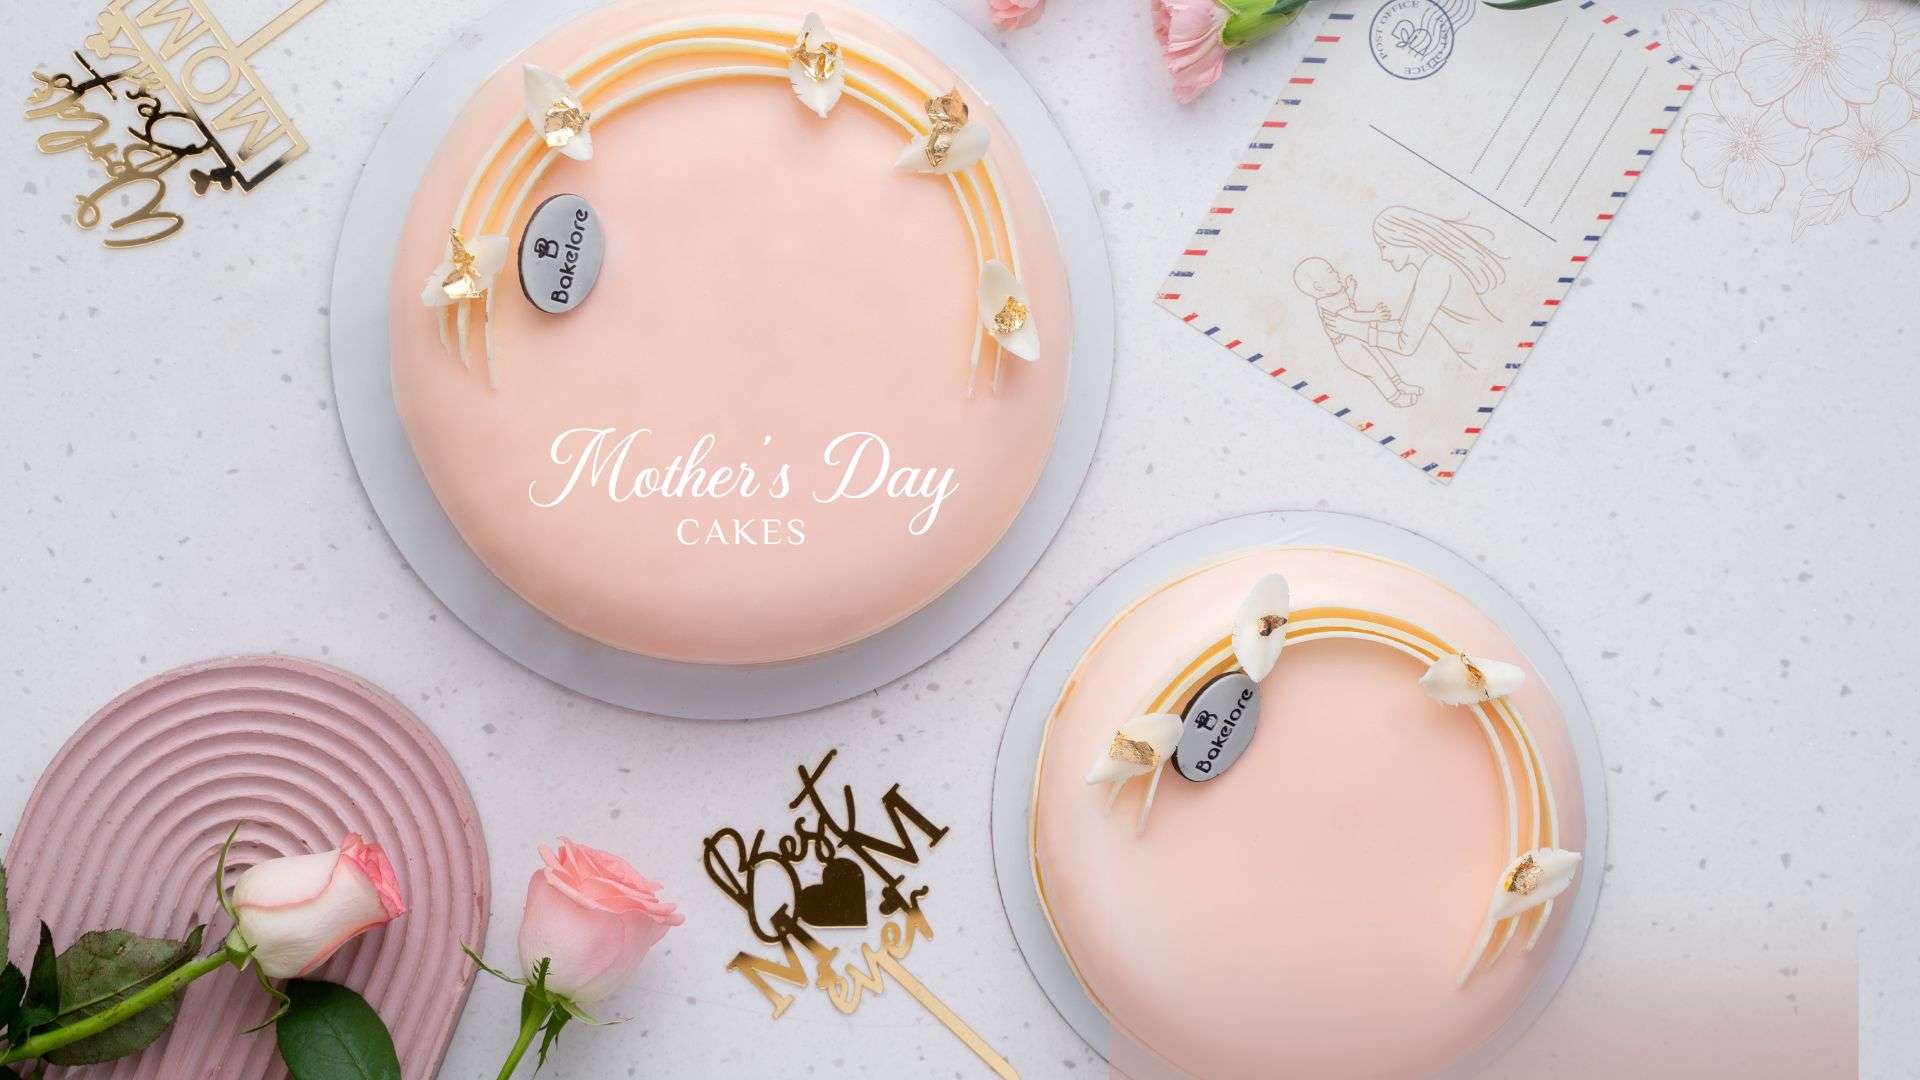 Mother's Day cakes